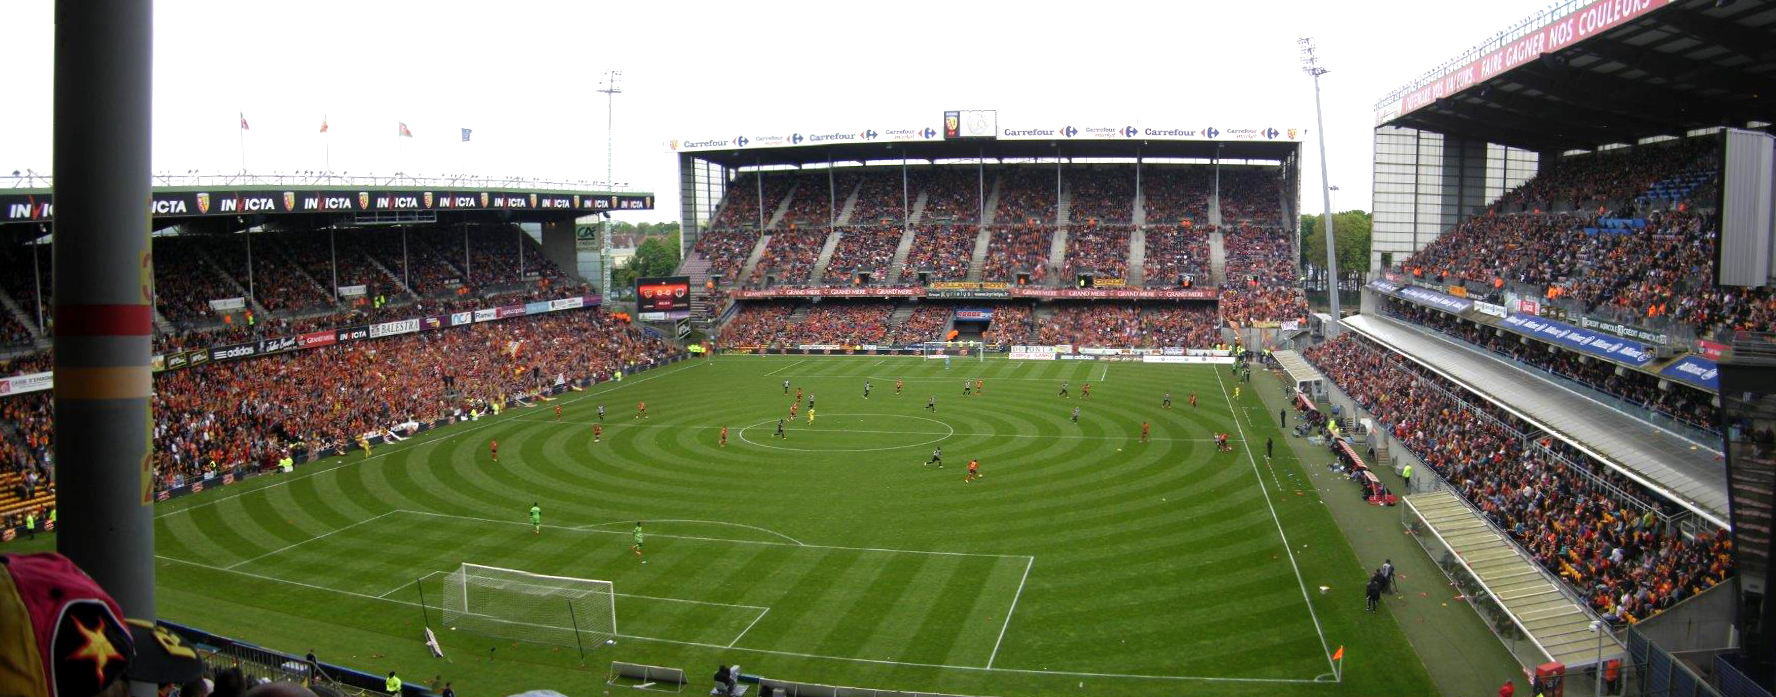 Latest travel itineraries for Stade Bollaert-Delelis in January